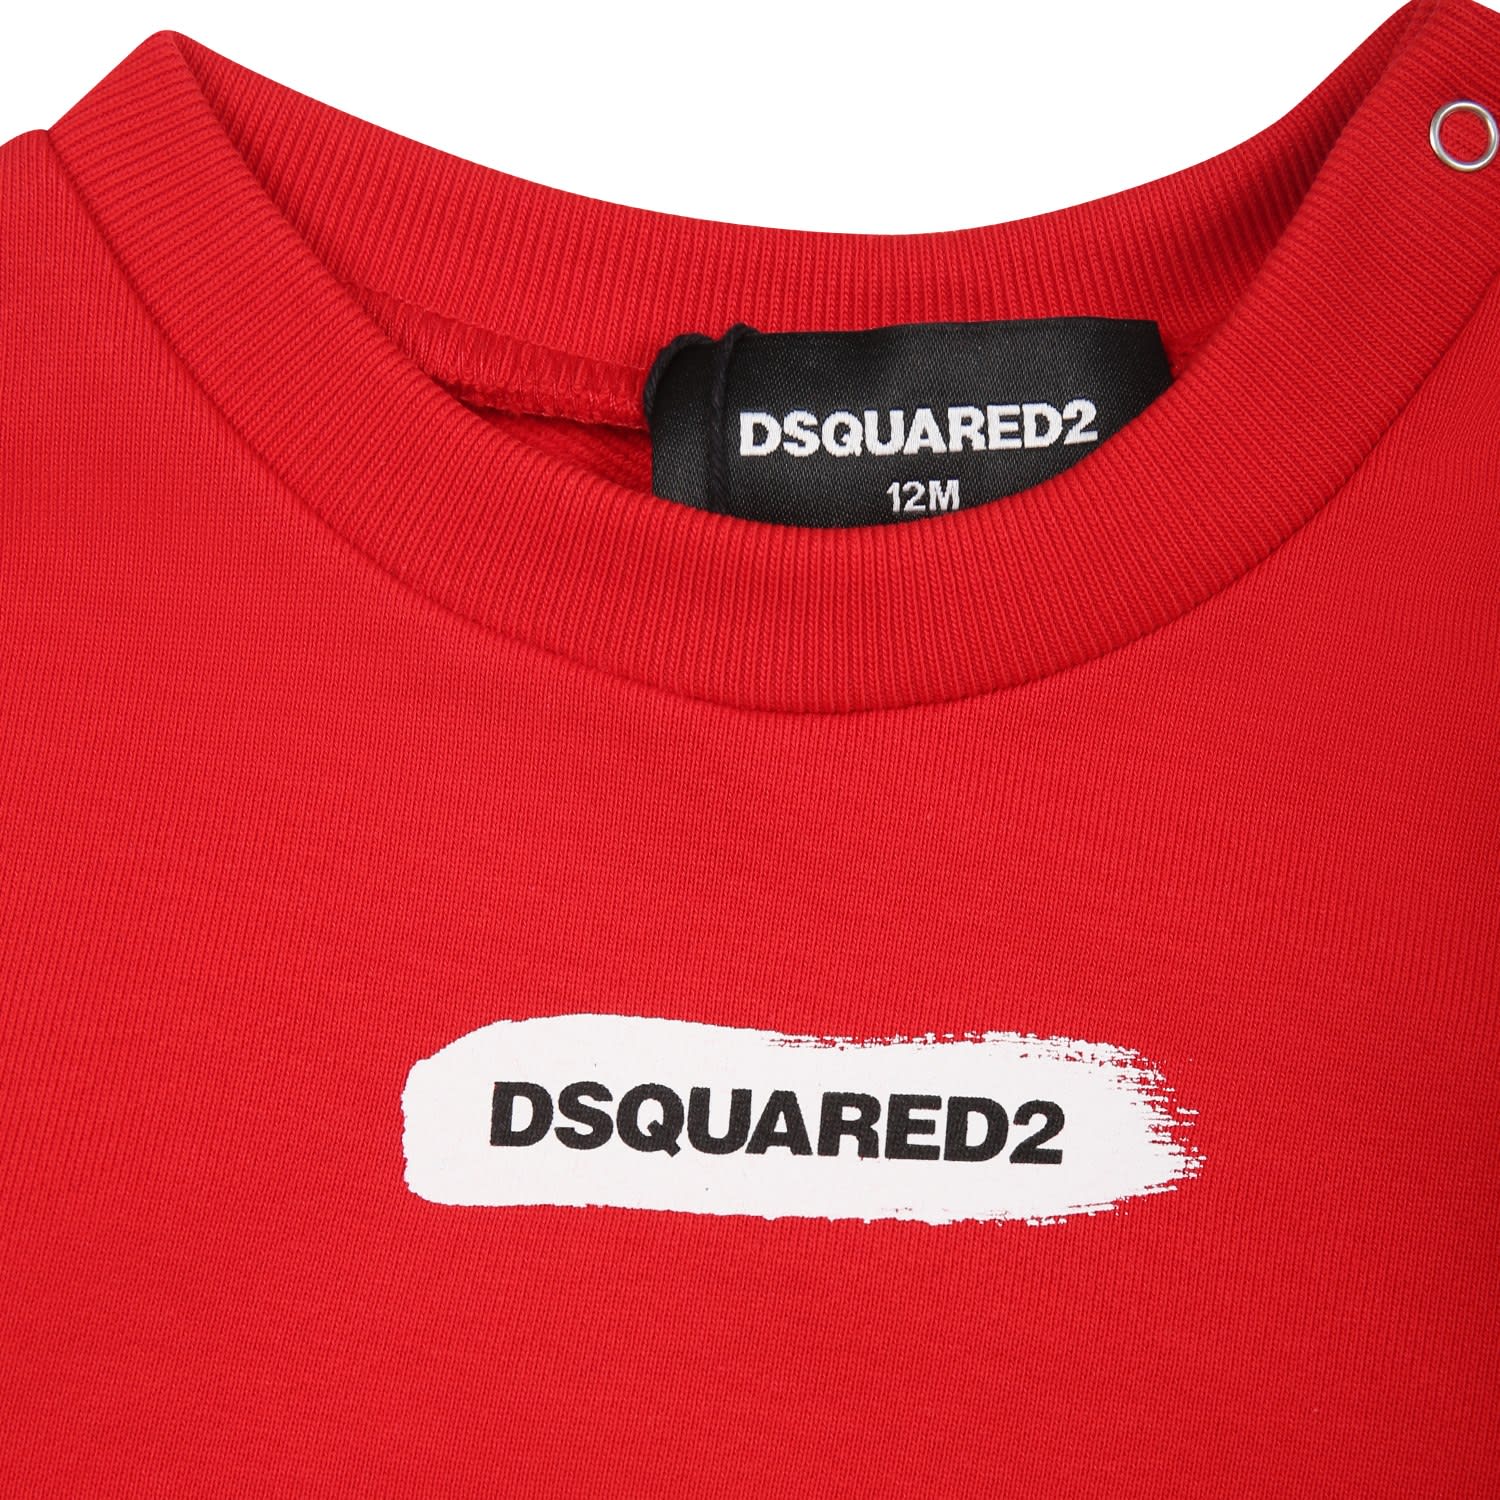 Shop Dsquared2 Red Sweatshirt For Baby Boy With Logo